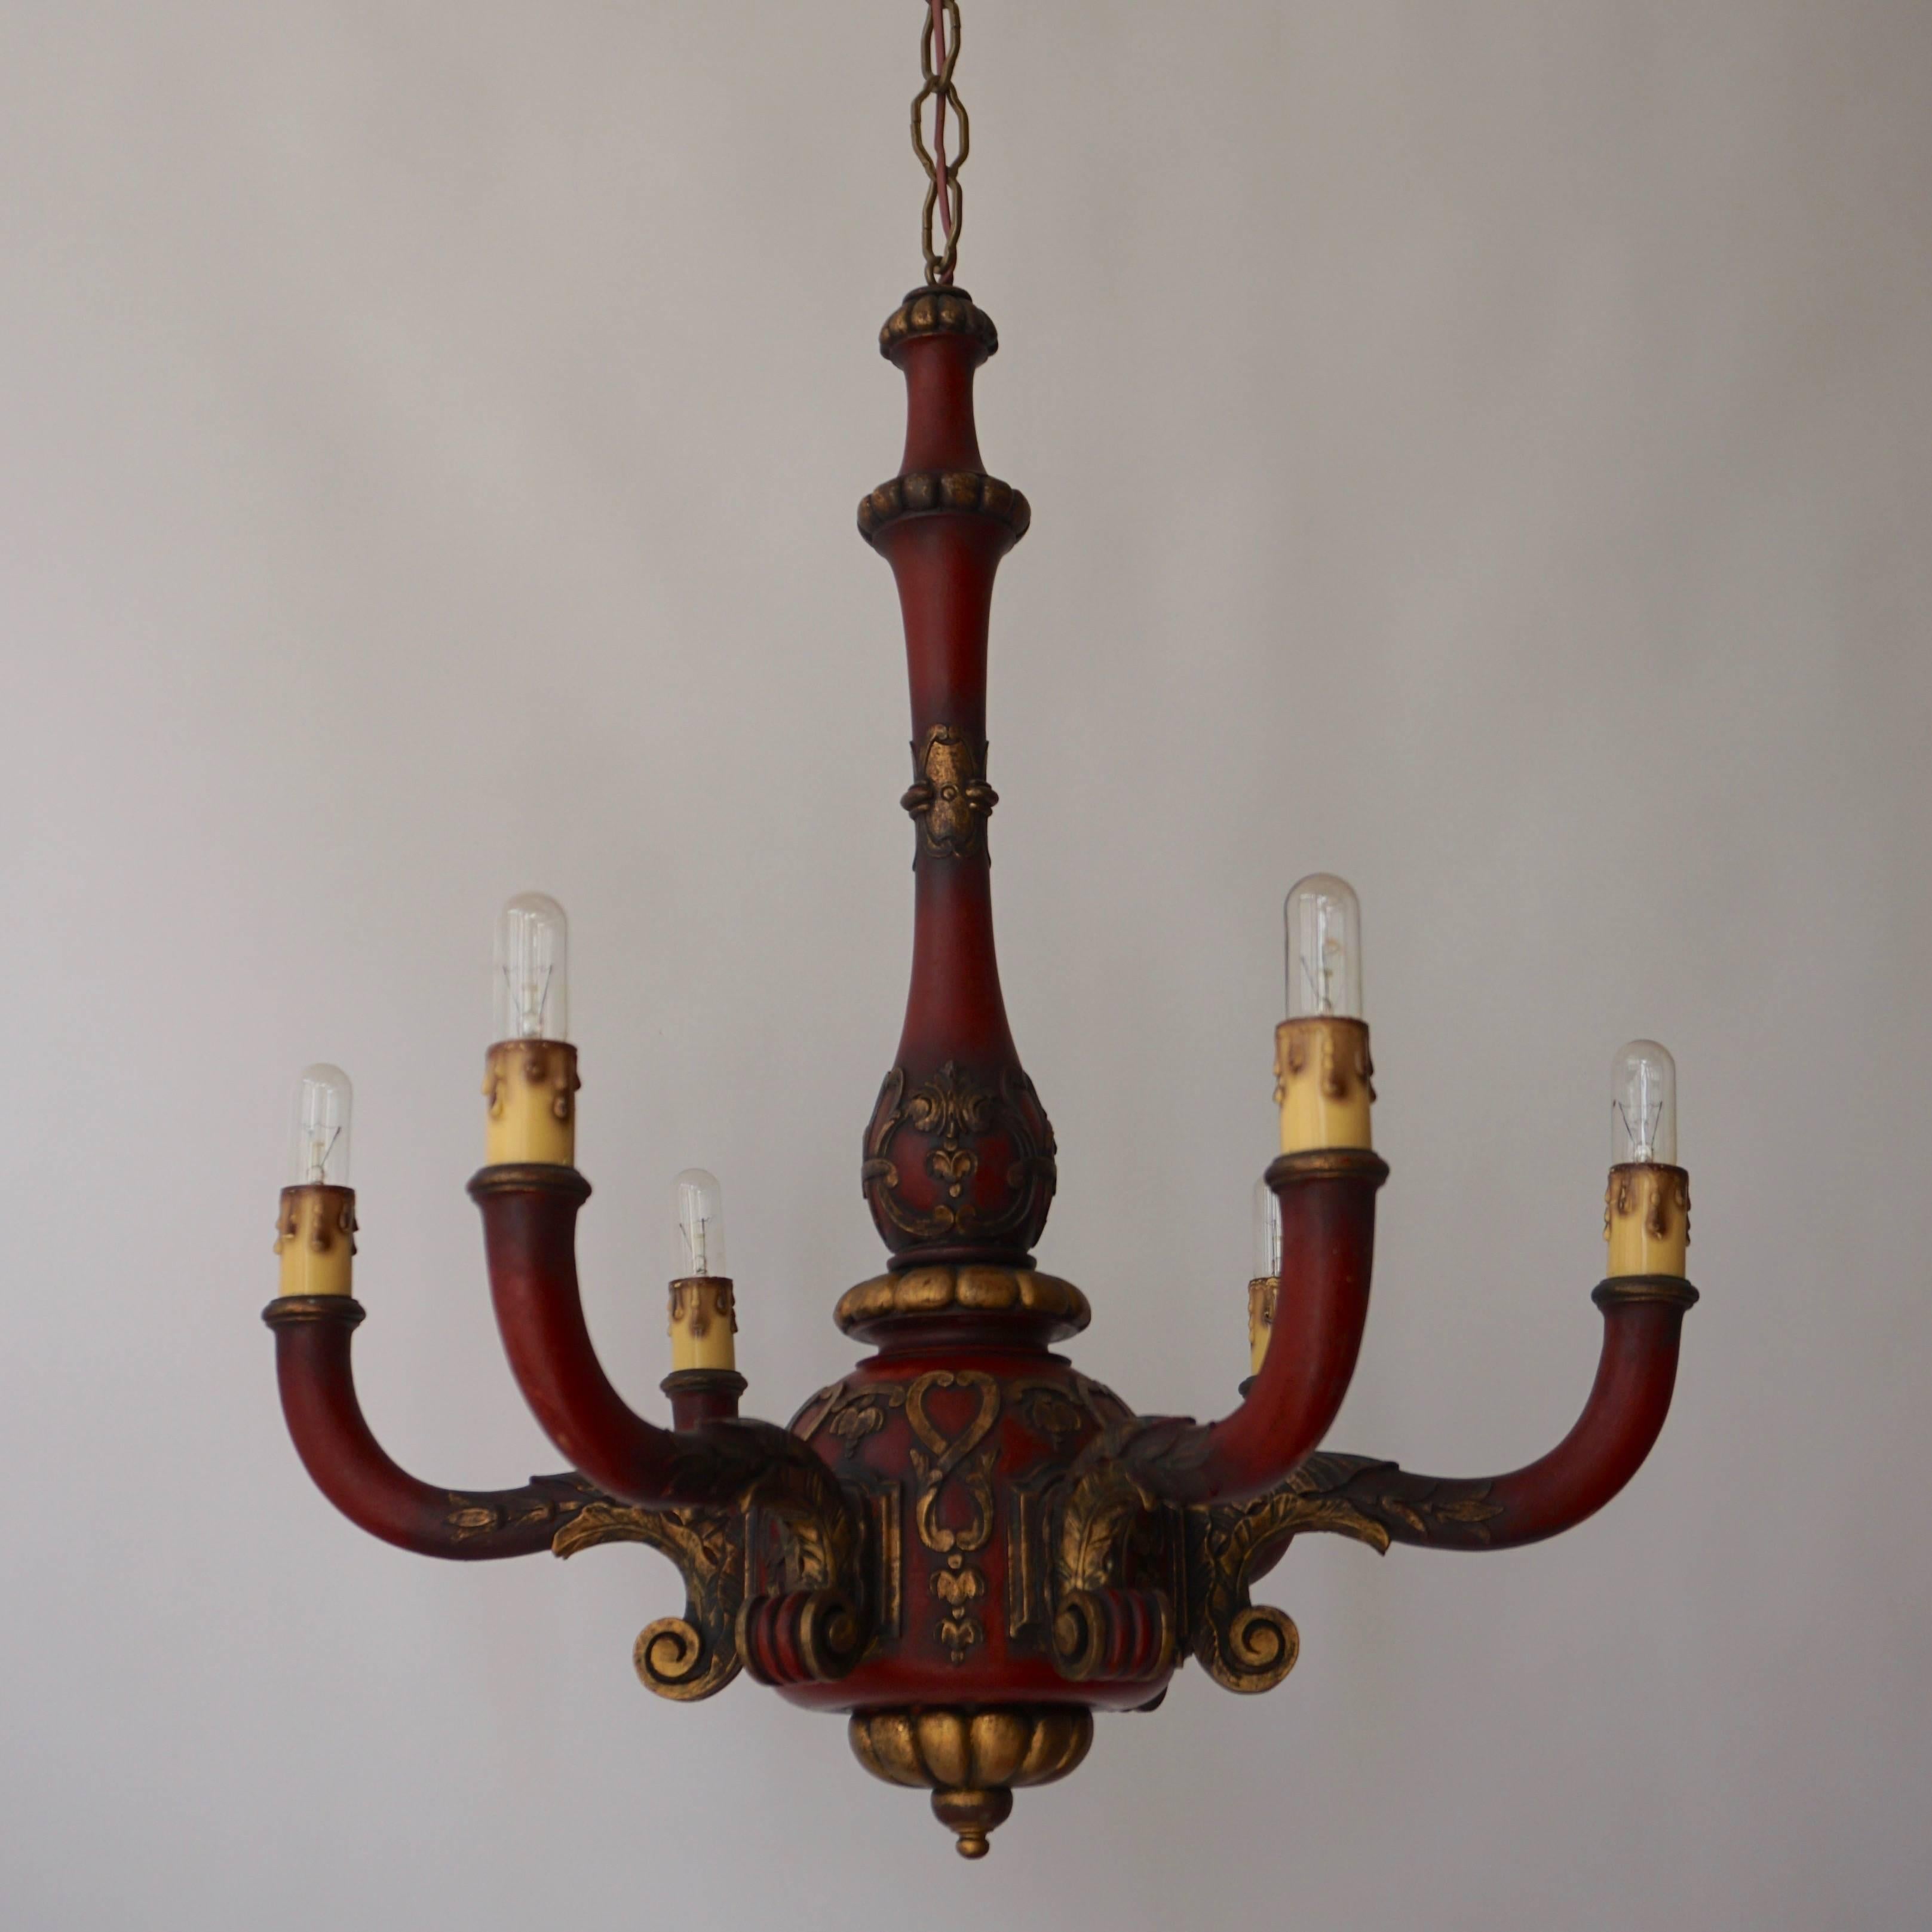 Painted wooden chandelier.
Six E14 bulbs.
Diameter 60 cm.
Height 63 cm.
Height with the chain 120 cm.